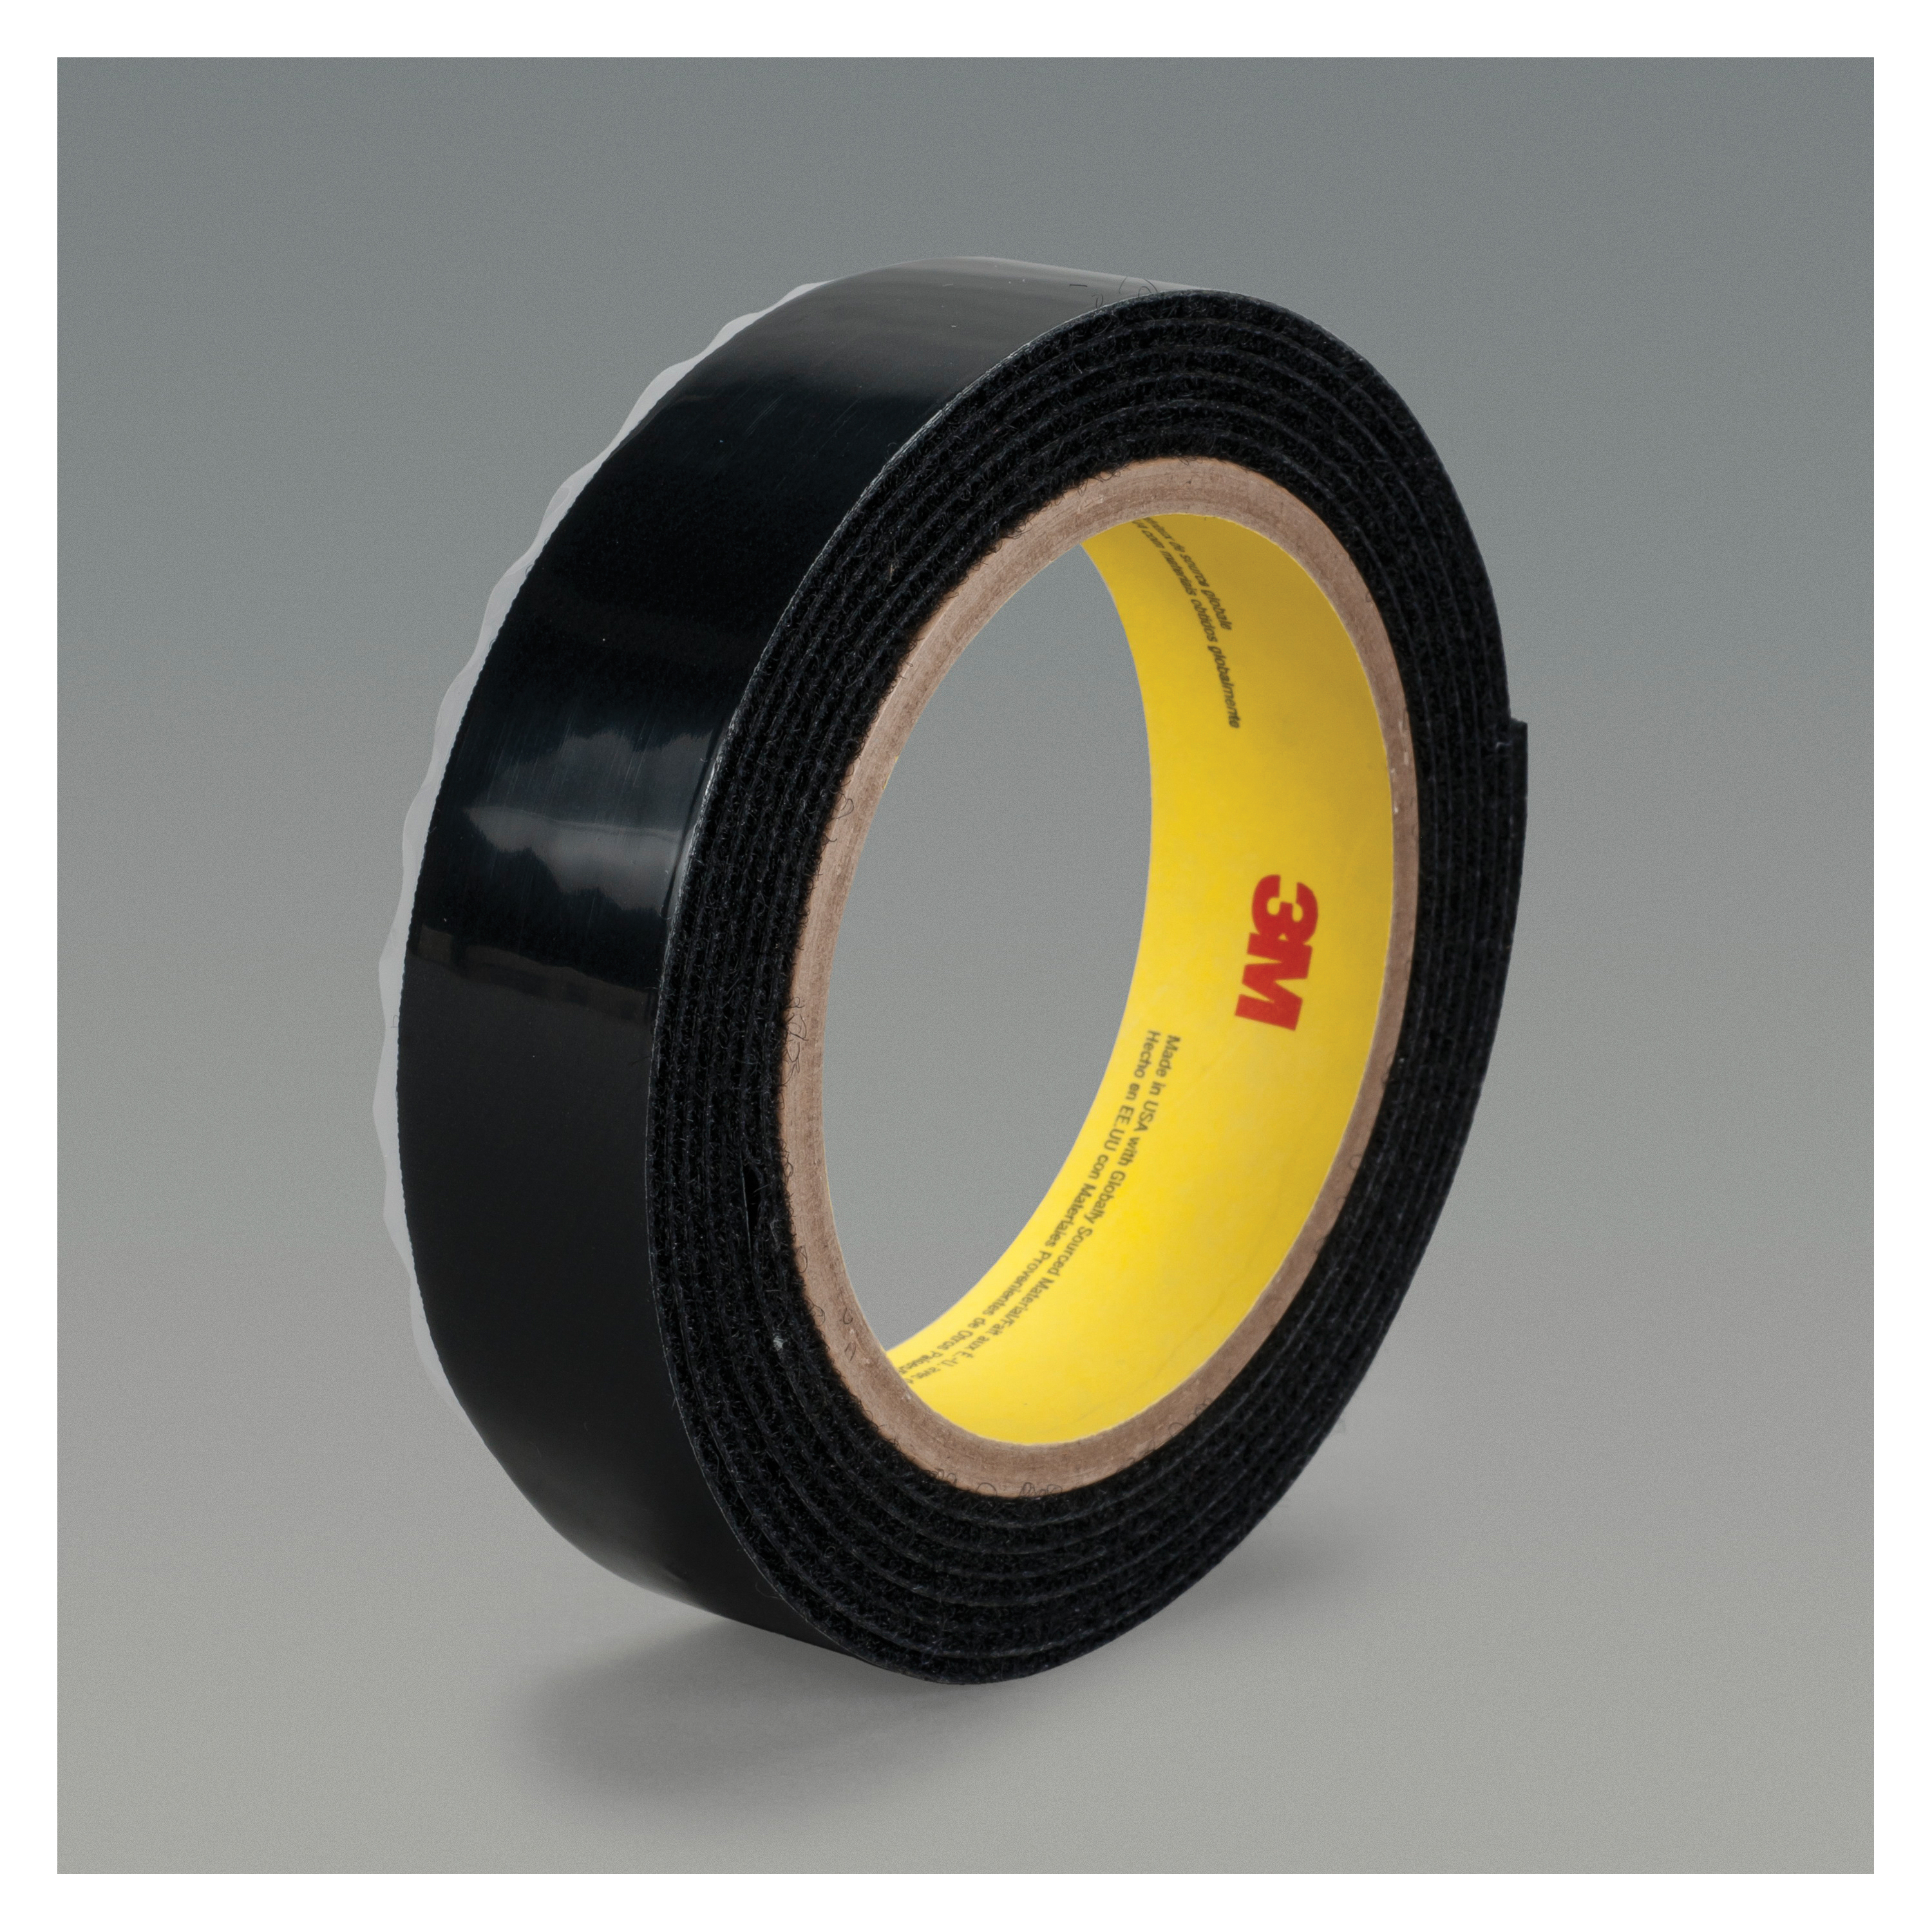 3M™ 021200-24353 Reclosable Loop Fastener Tape, 50 yd L x 1-1/2 in W, 0.15 in THK Engaged, Acrylic Adhesive, Woven Nylon Backing, Black